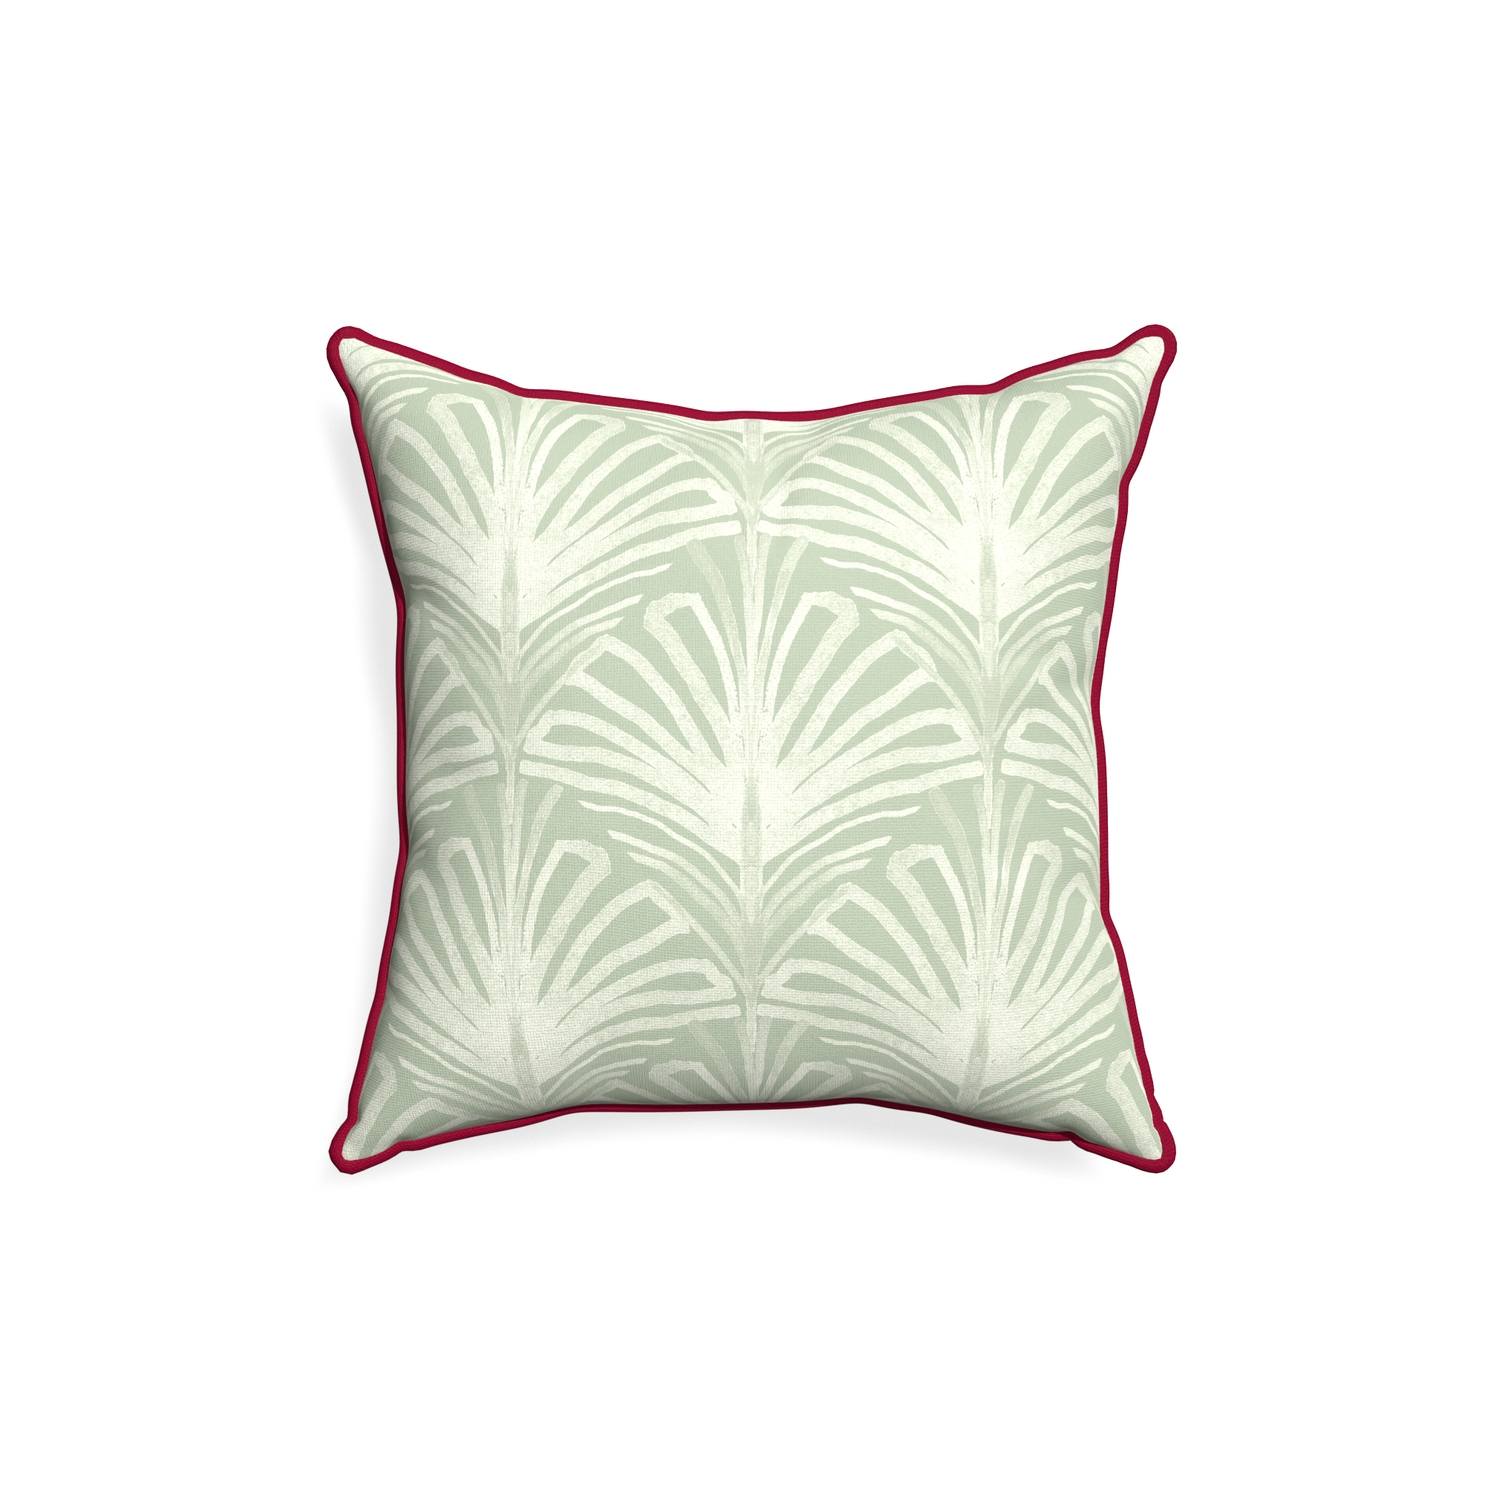 18-square suzy sage custom pillow with raspberry piping on white background